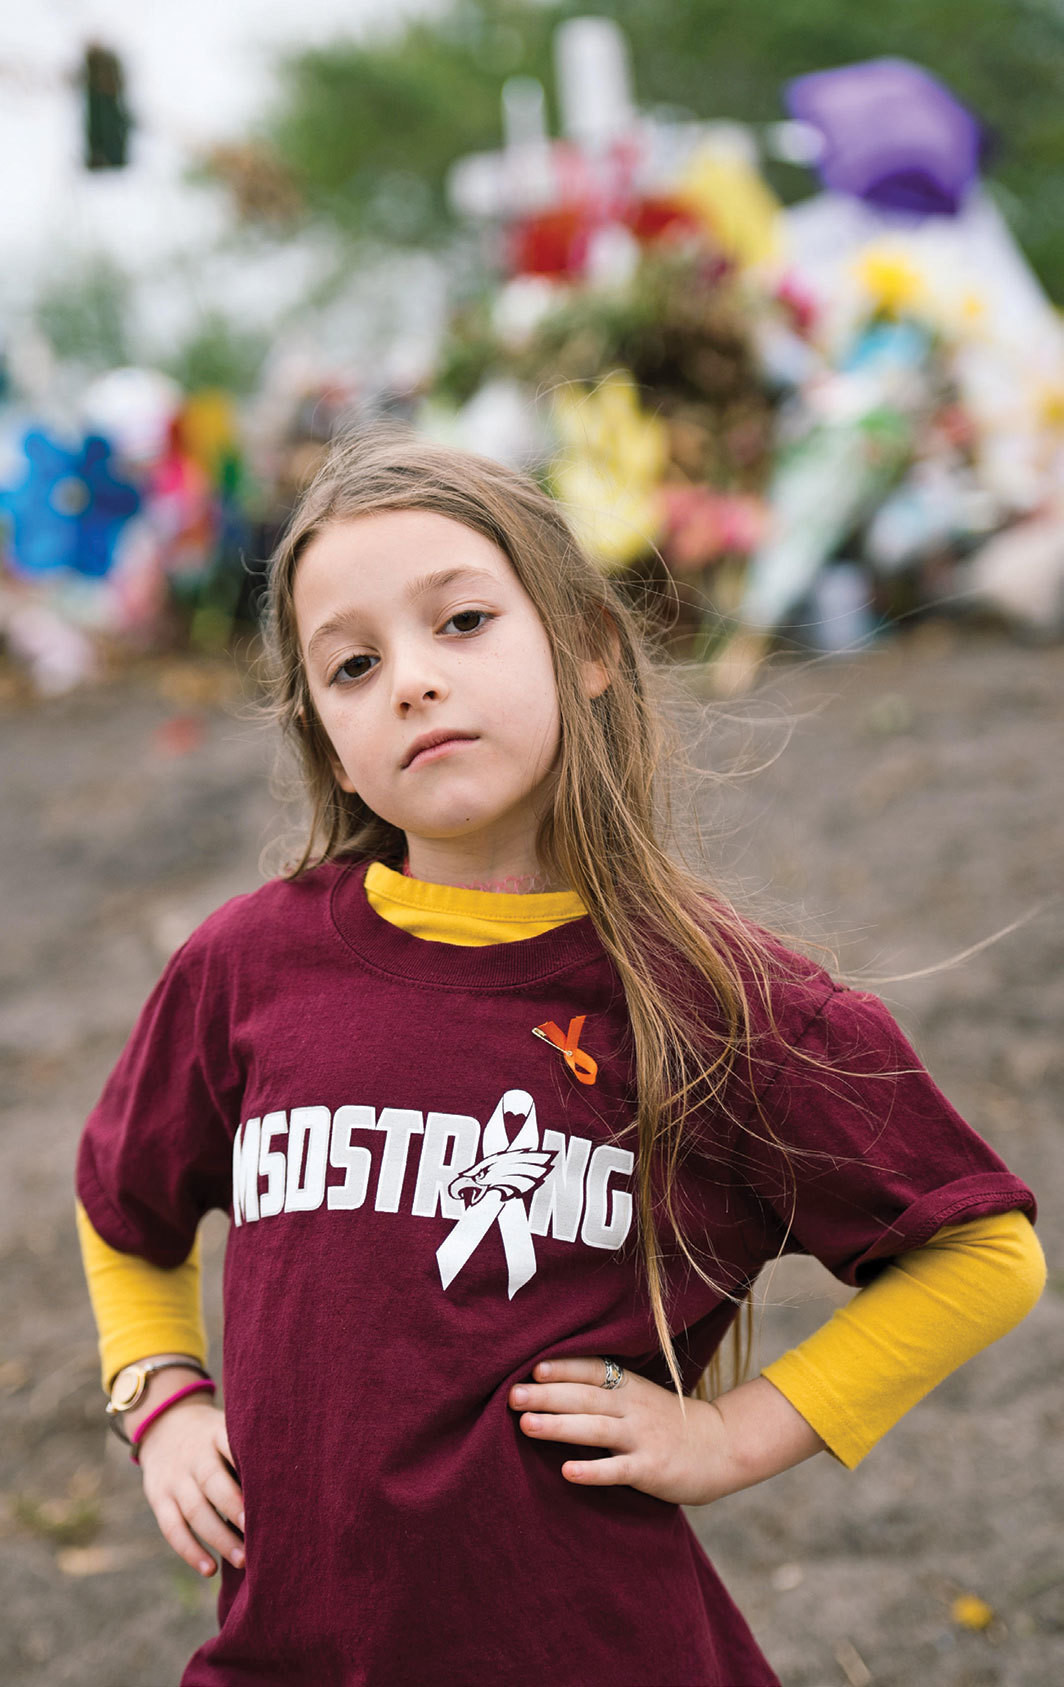 Seven-year-old Emma at the Marjory Stoneman Douglas High School memorial site, Parkland, Florida, March 10, 2018.